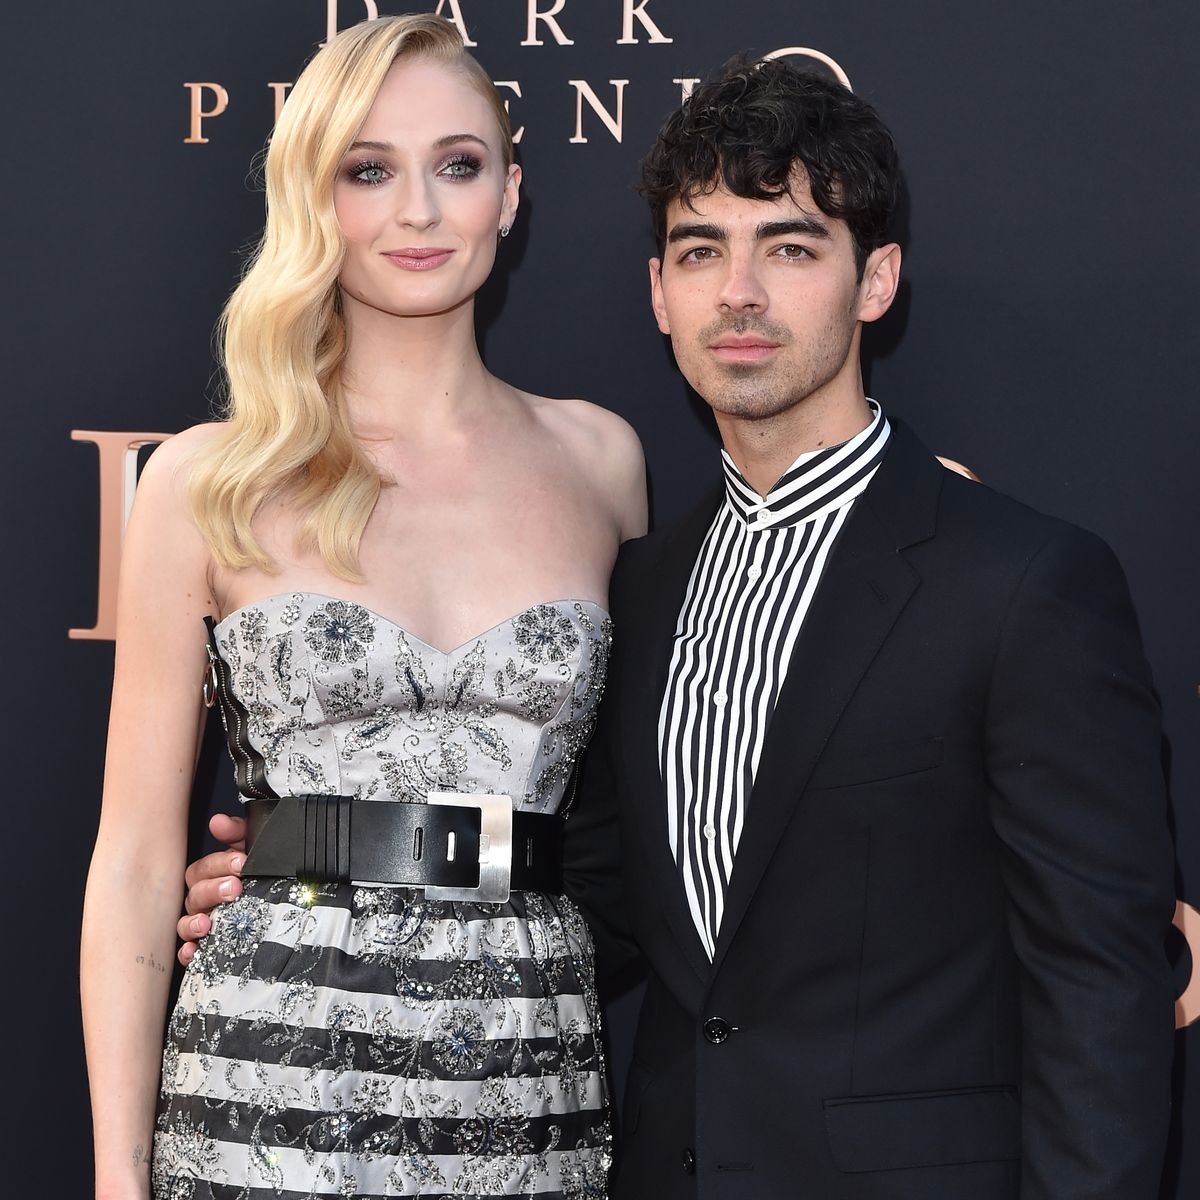 hollywood, california   june 04 sophie turner and joe jonas attend the premiere of 20th century foxs dark phoenix at tcl chinese theatre on june 04, 2019 in hollywood, california photo by axellebauer griffinfilmmagic